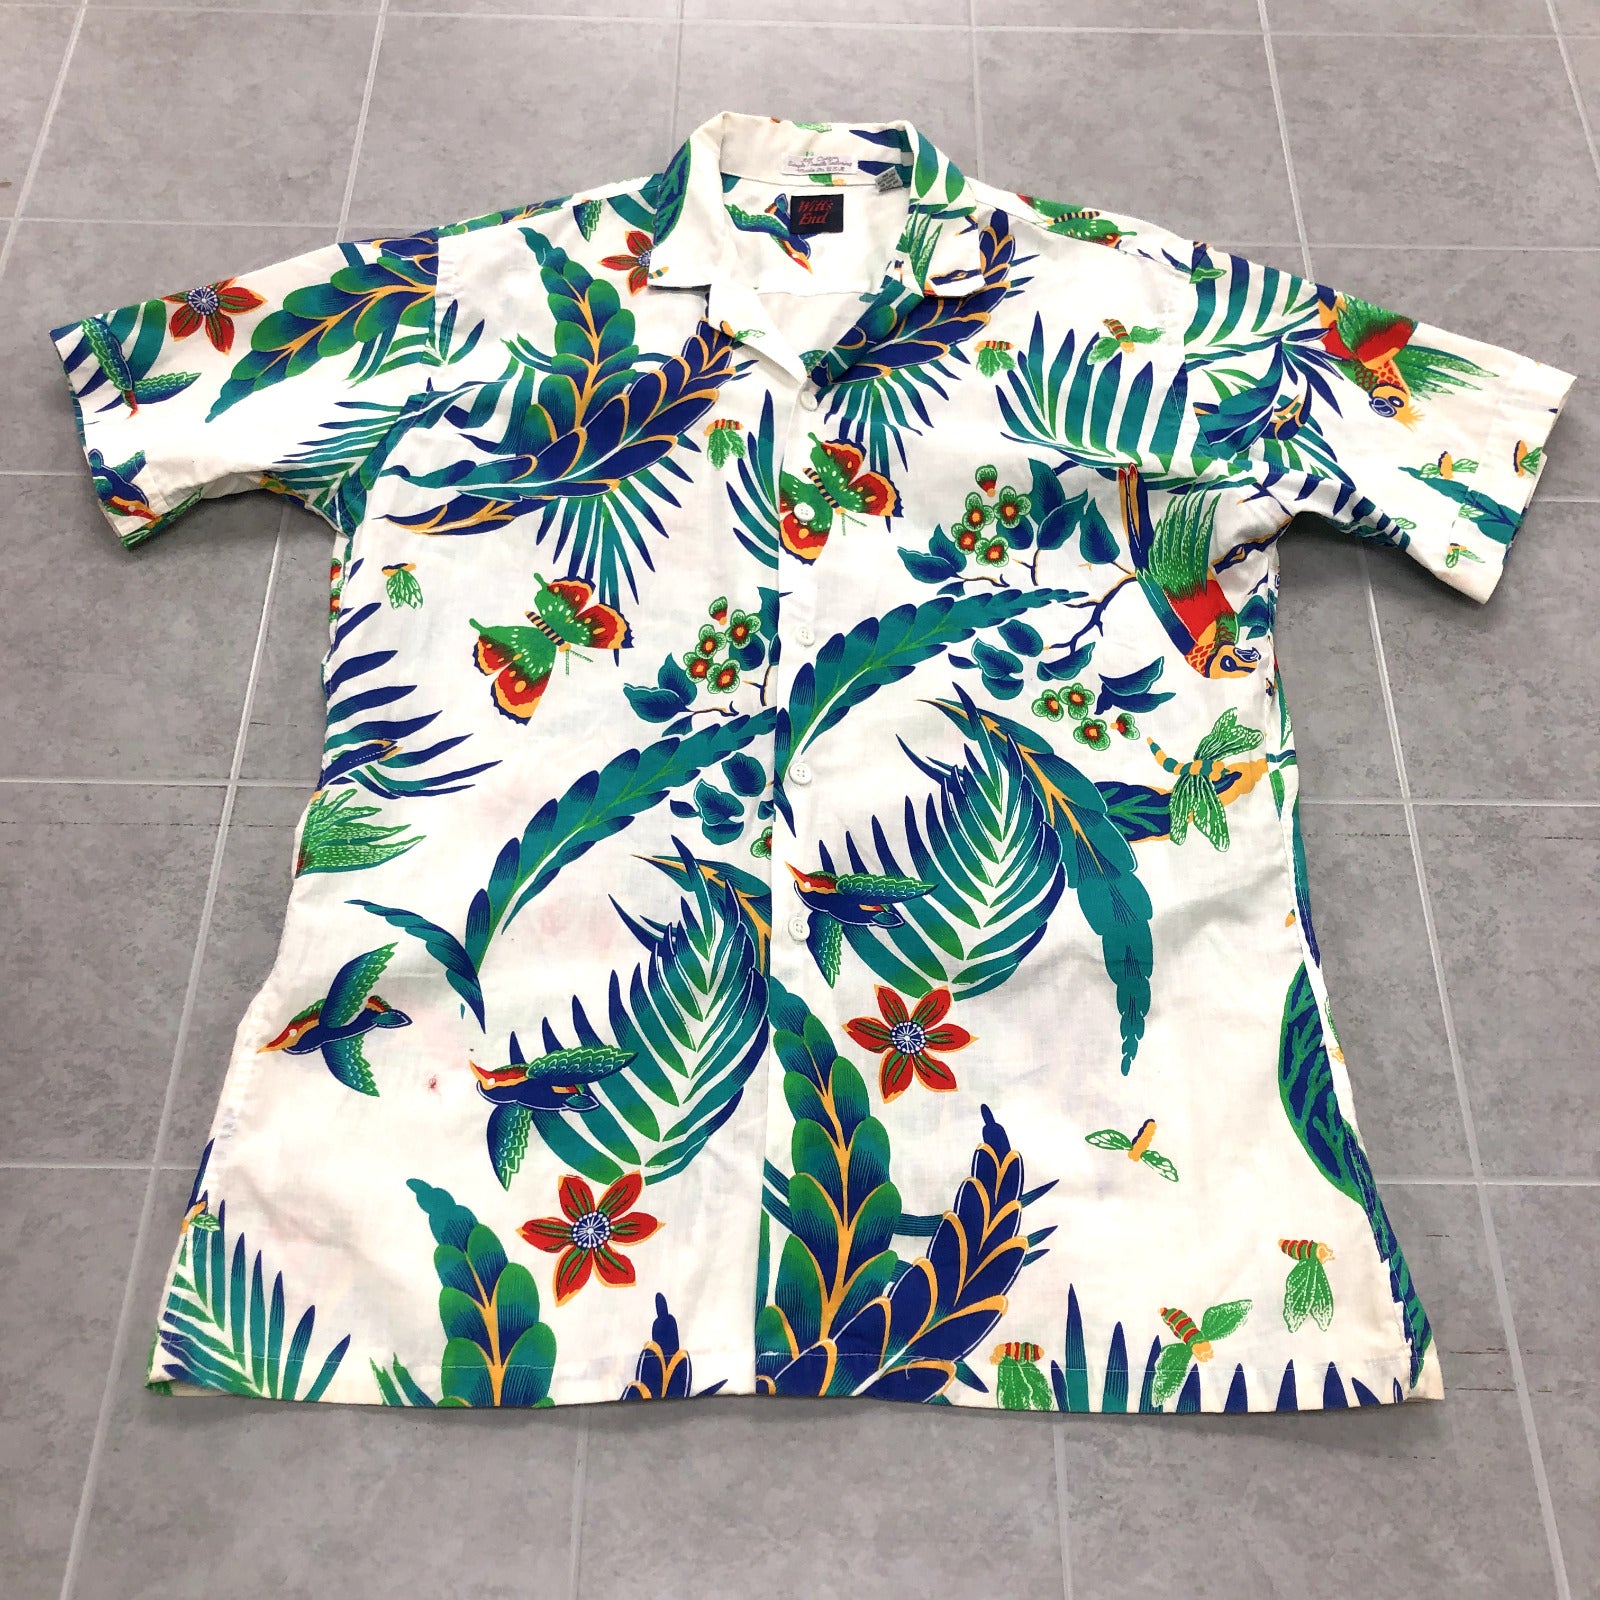 Vintage Witts End White Floral Short Sleeve Casual Hawaiian Shirt Adult Size L